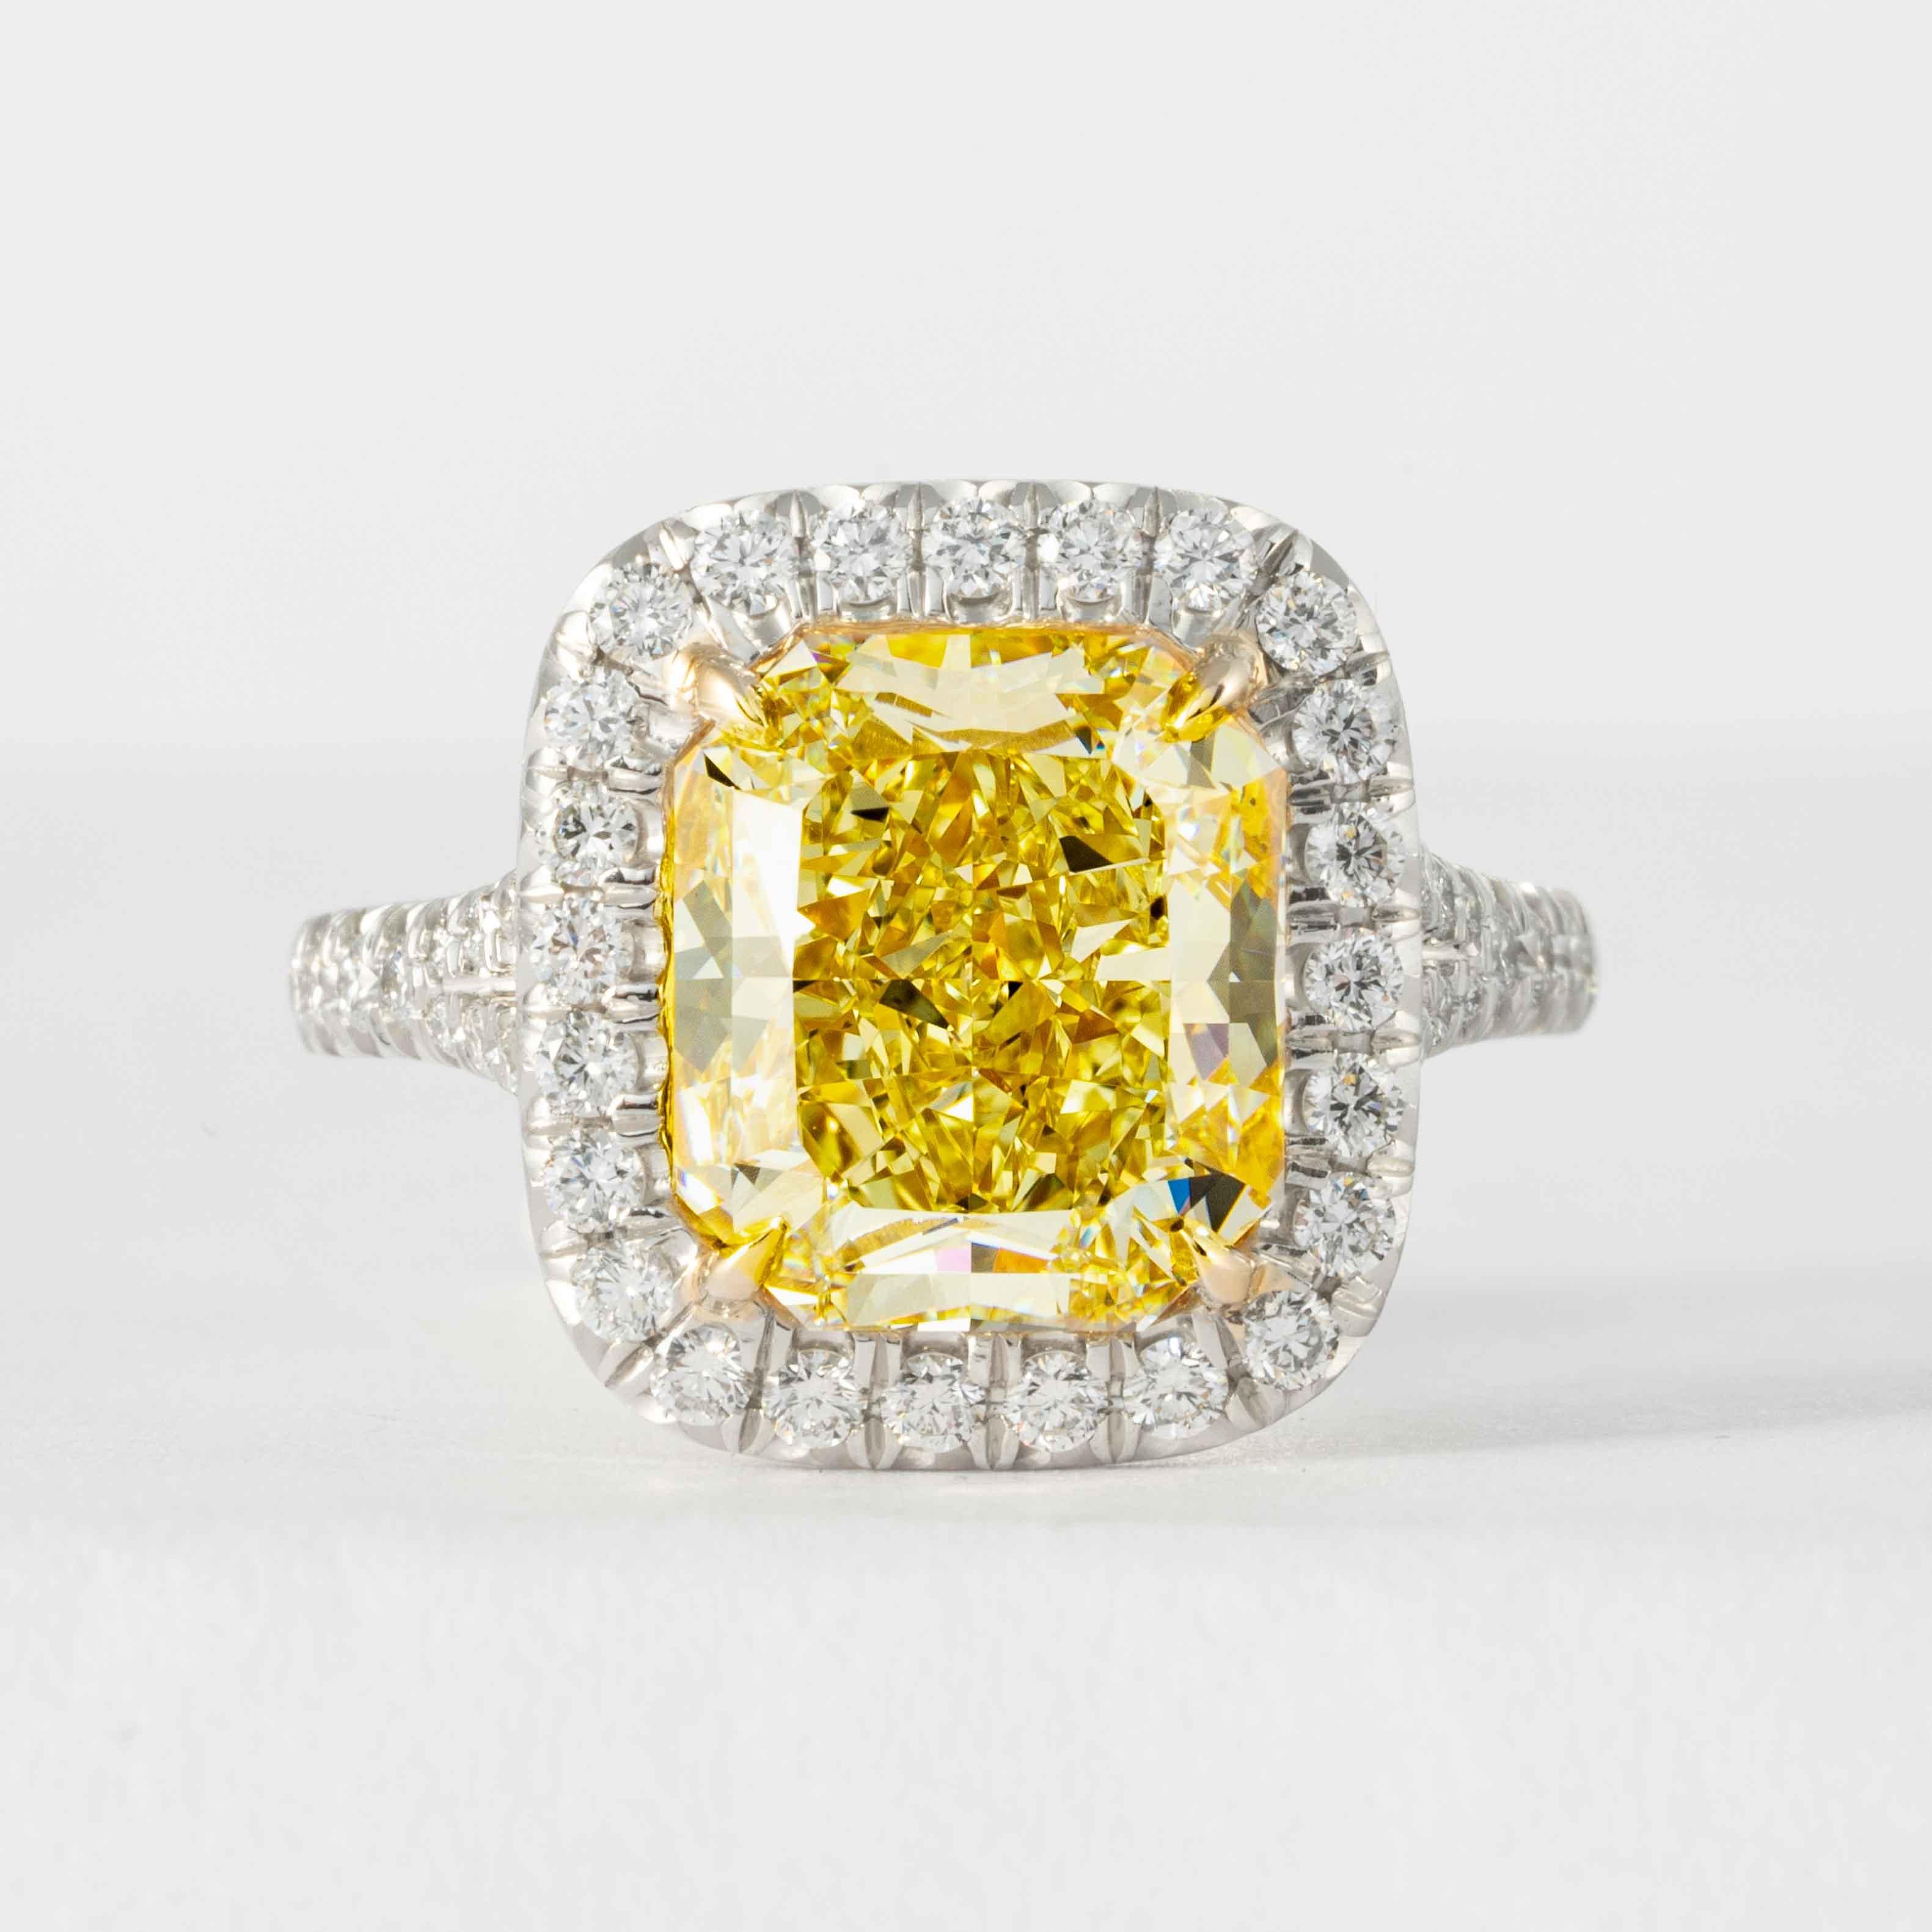 This fancy intense yellow radiant cut diamond is offered by Shreve, Crump & Low. This fancy yellow Radiant cut diamond is custom set in a handcrafted Shreve, Crump & Low platinum and 18 karat yellow gold halo ring consisting of 1 radiant cut yellow